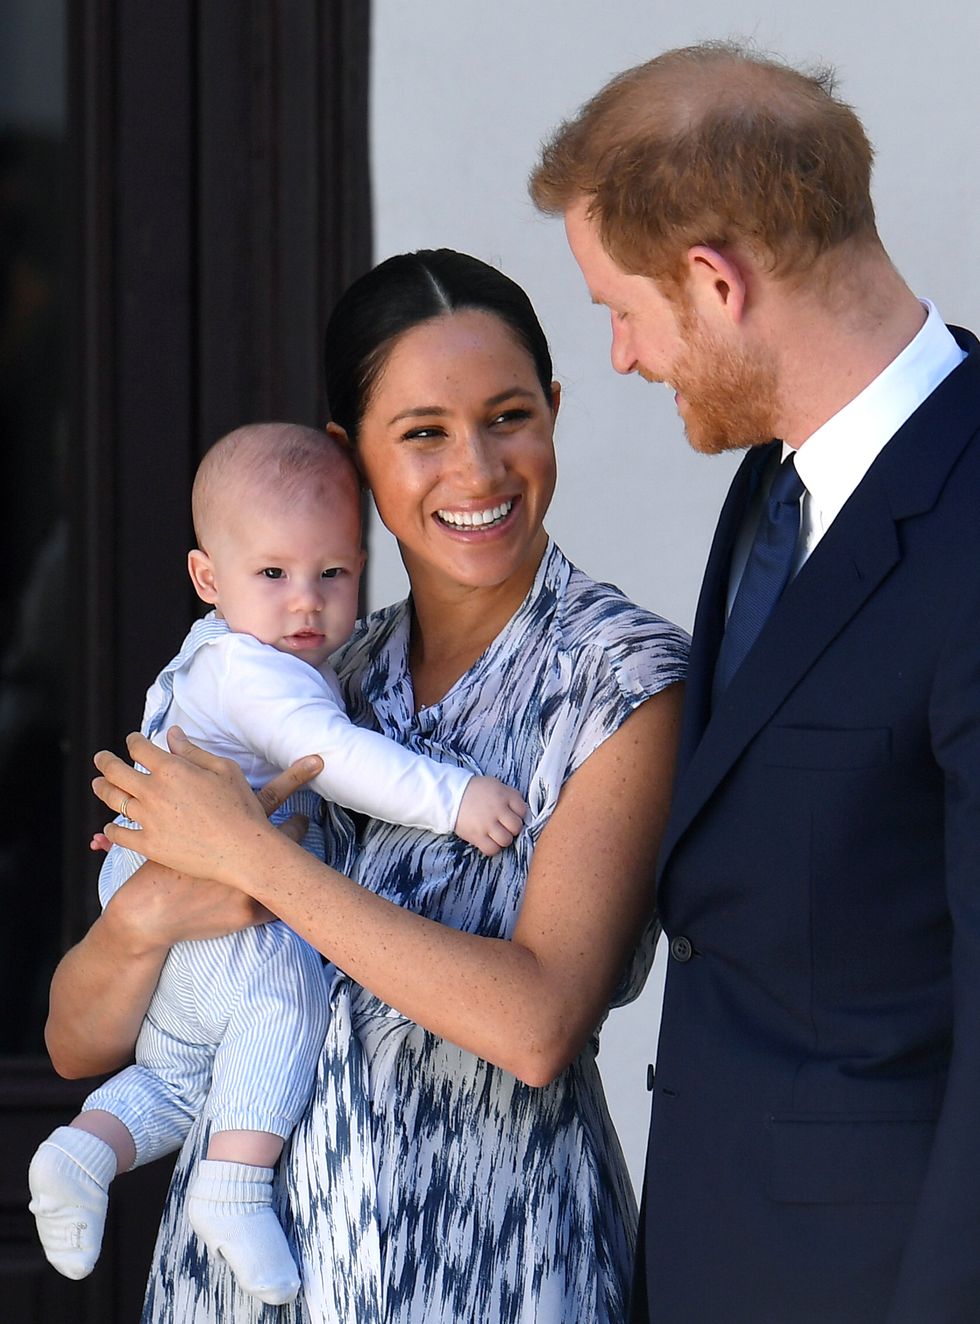 cape town, south africa   september 25 prince harry, duke of sussex, meghan, duchess of sussex and their baby son archie mountbatten windsor meet archbishop desmond tutu at the desmond  leah tutu legacy foundation during their royal tour of south africa on september 25, 2019 in cape town, south africa photo by toby melville   poolgetty images